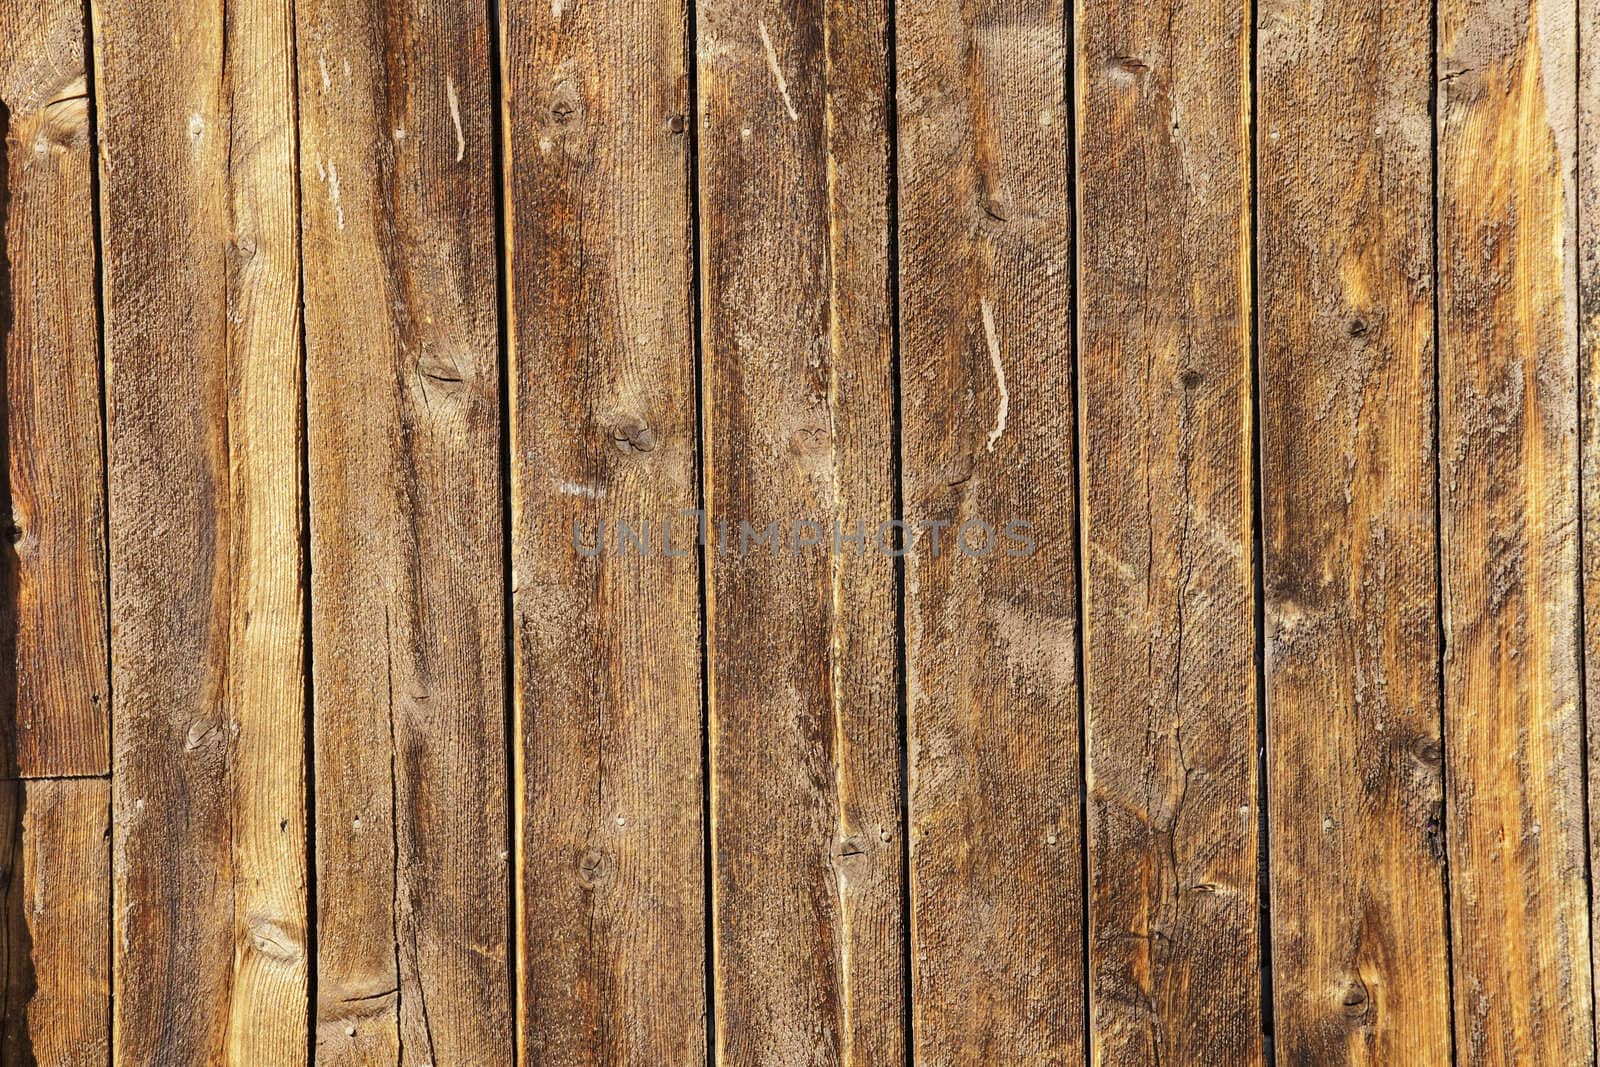 Multiple weathered wood planks by Mirage3